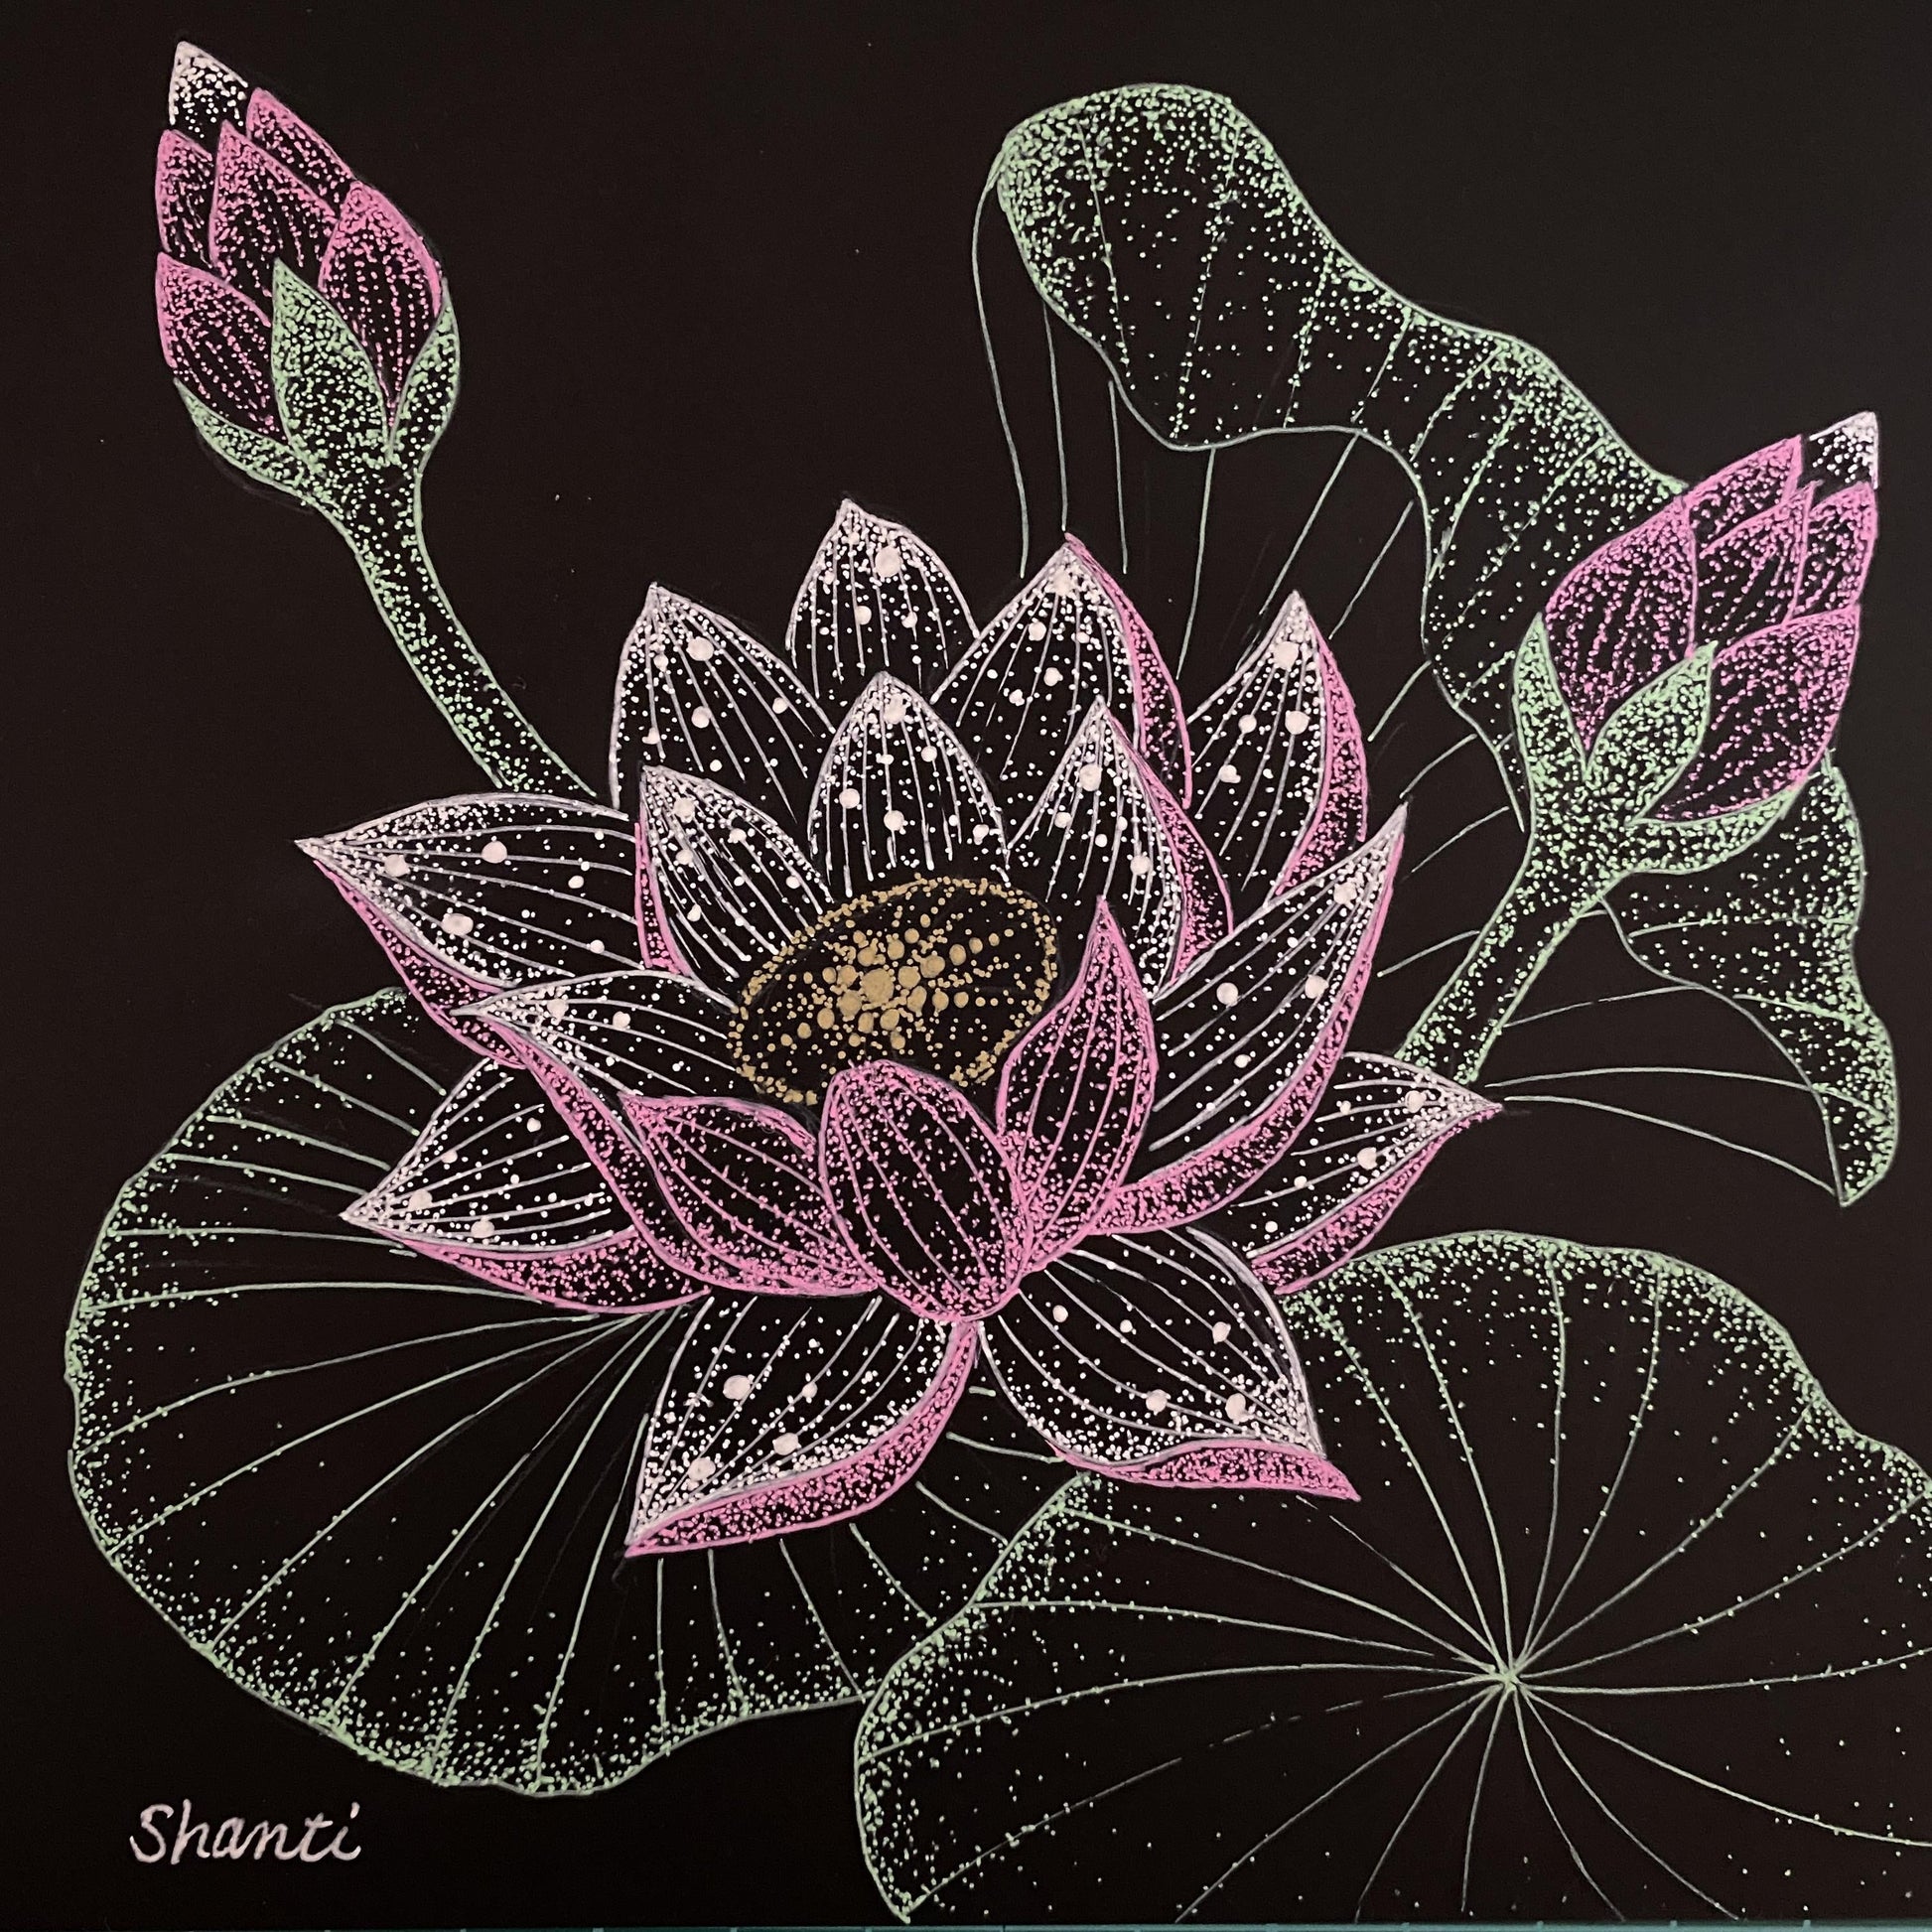 Lotus - FROM ARTIST